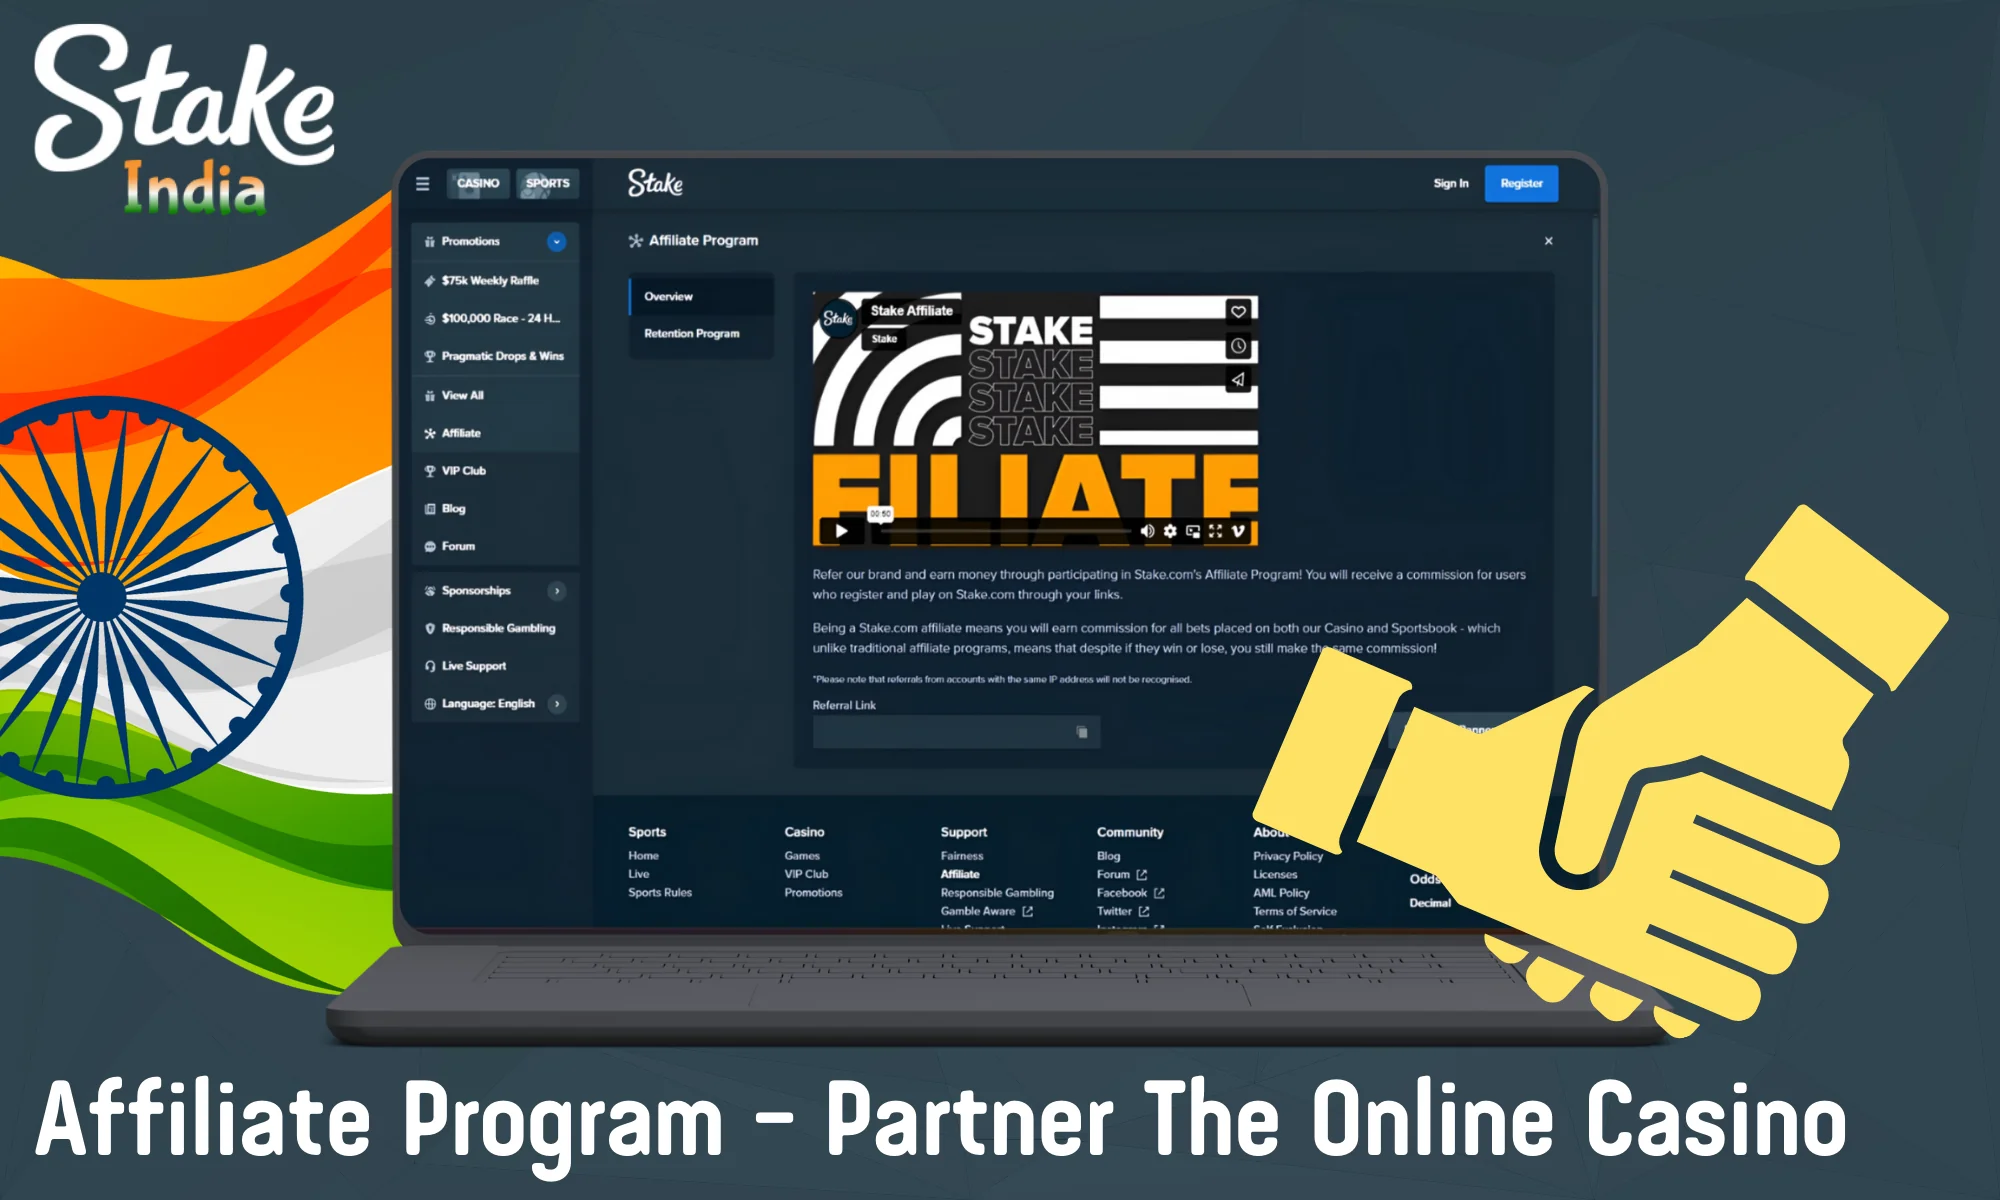 The Stake affiliate program in India provides all active Internet users with an additional opportunity to earn extra money